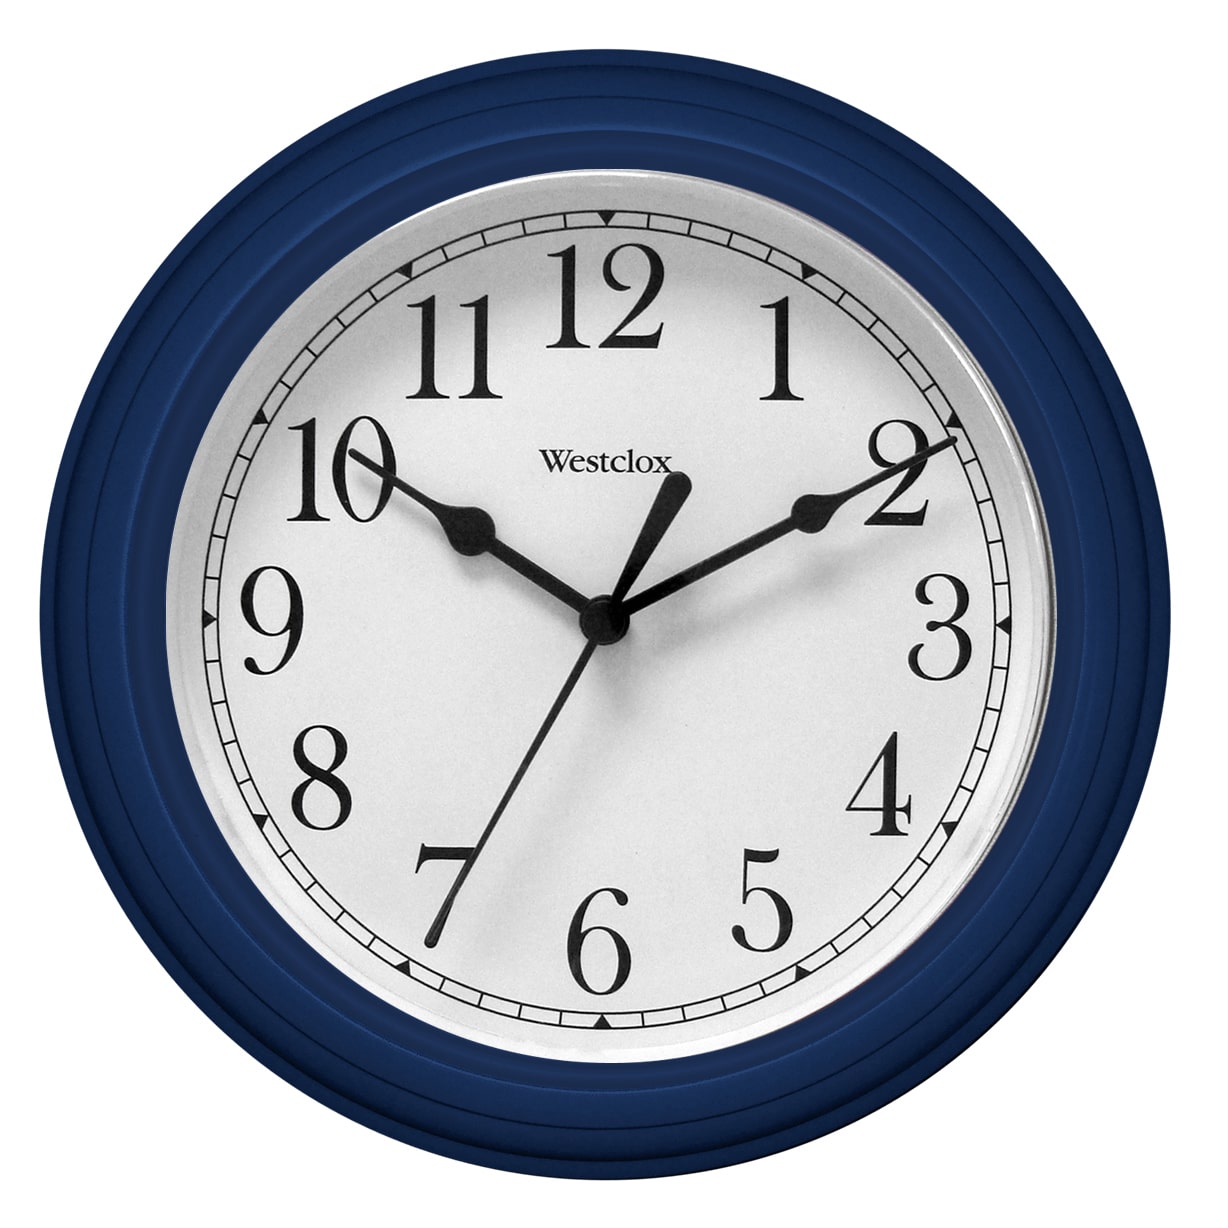 Westclox 46985 Simplicity 9 Inch Round Wall Clock- Blue - image 2 of 3